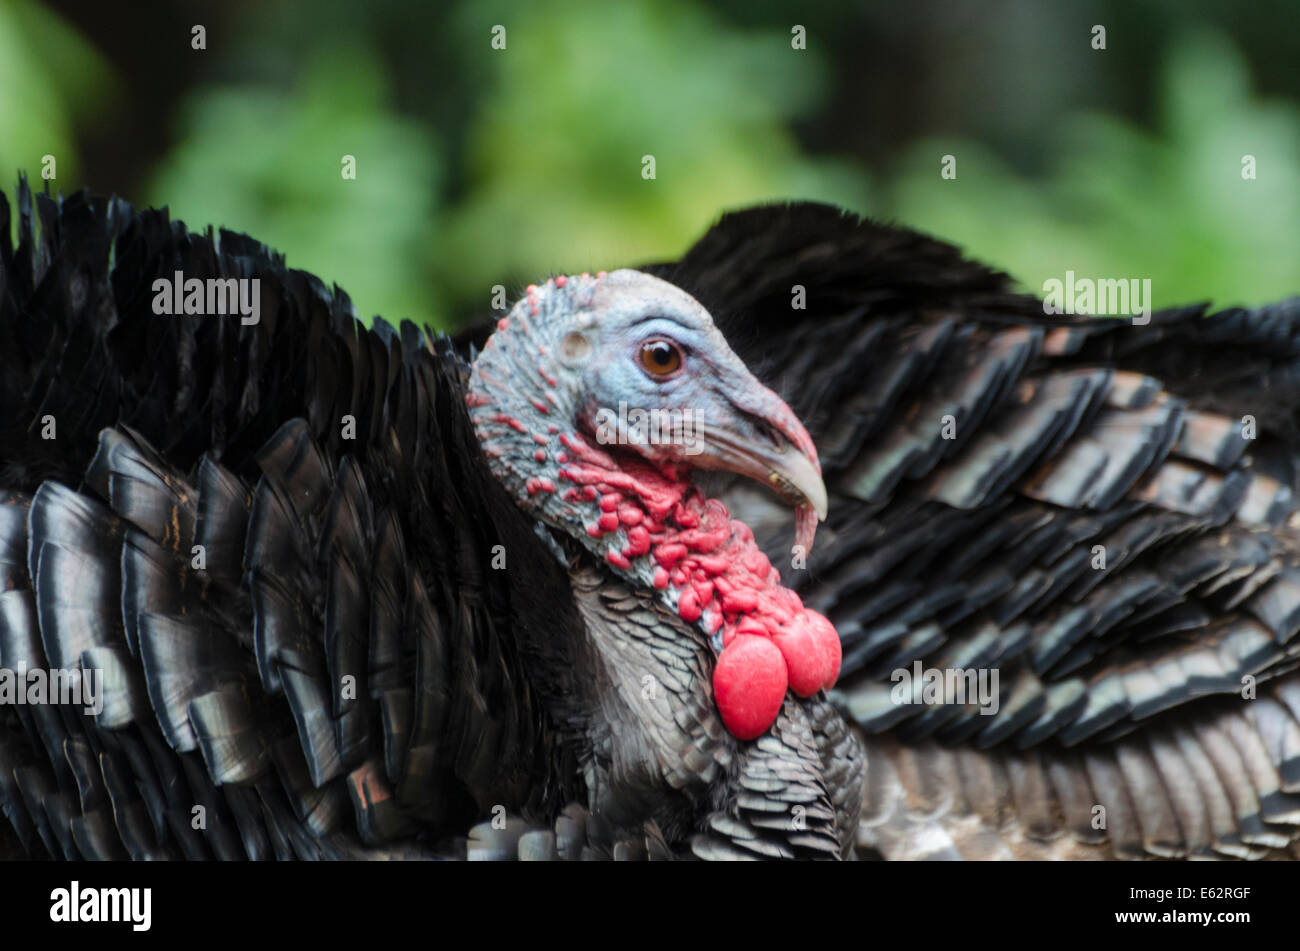 Wild Turkey Male (Meleagris gallopavo) wattles engorged with blood to attract females during the breeding season. Stock Photo